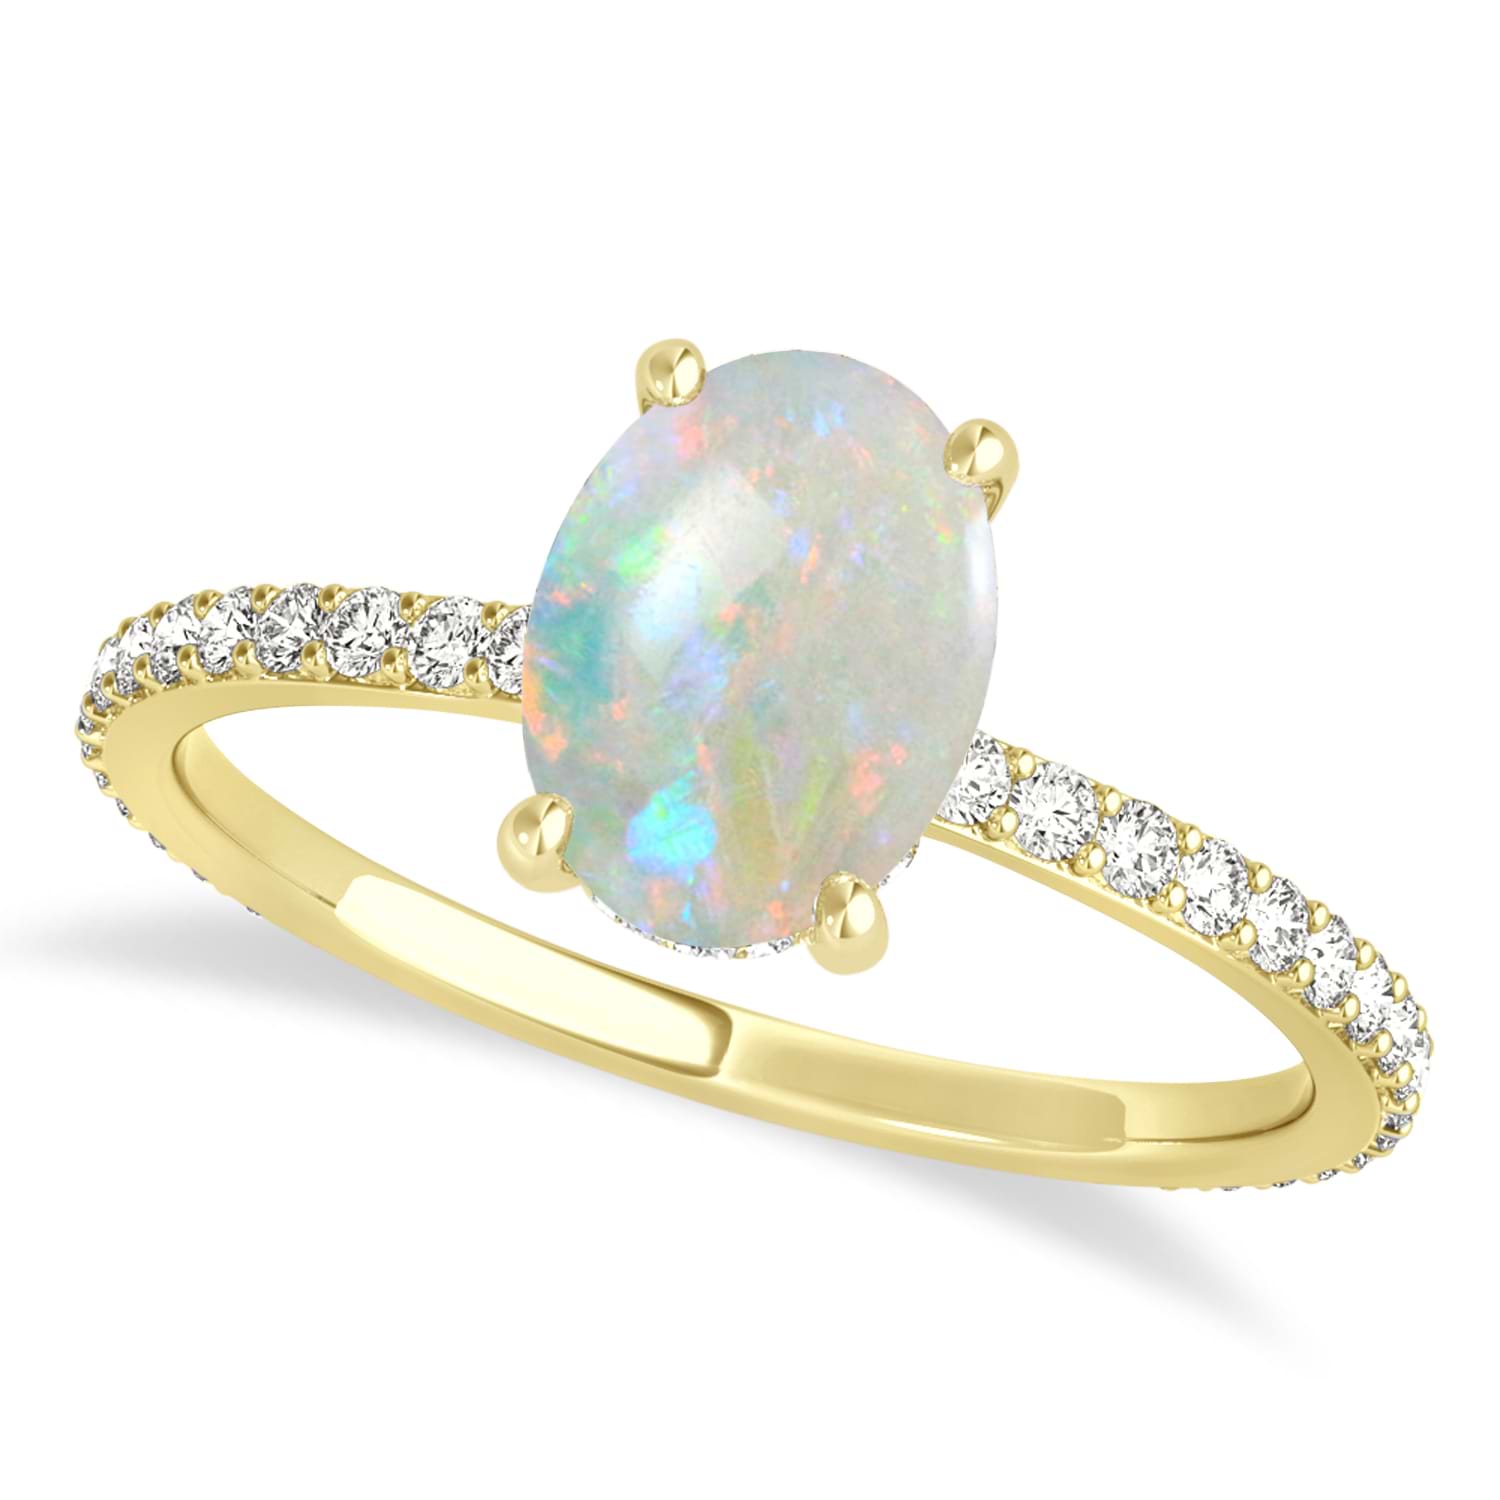 Oval Opal & Diamond Hidden Halo Engagement Ring 14k Yellow Gold (0.76ct)